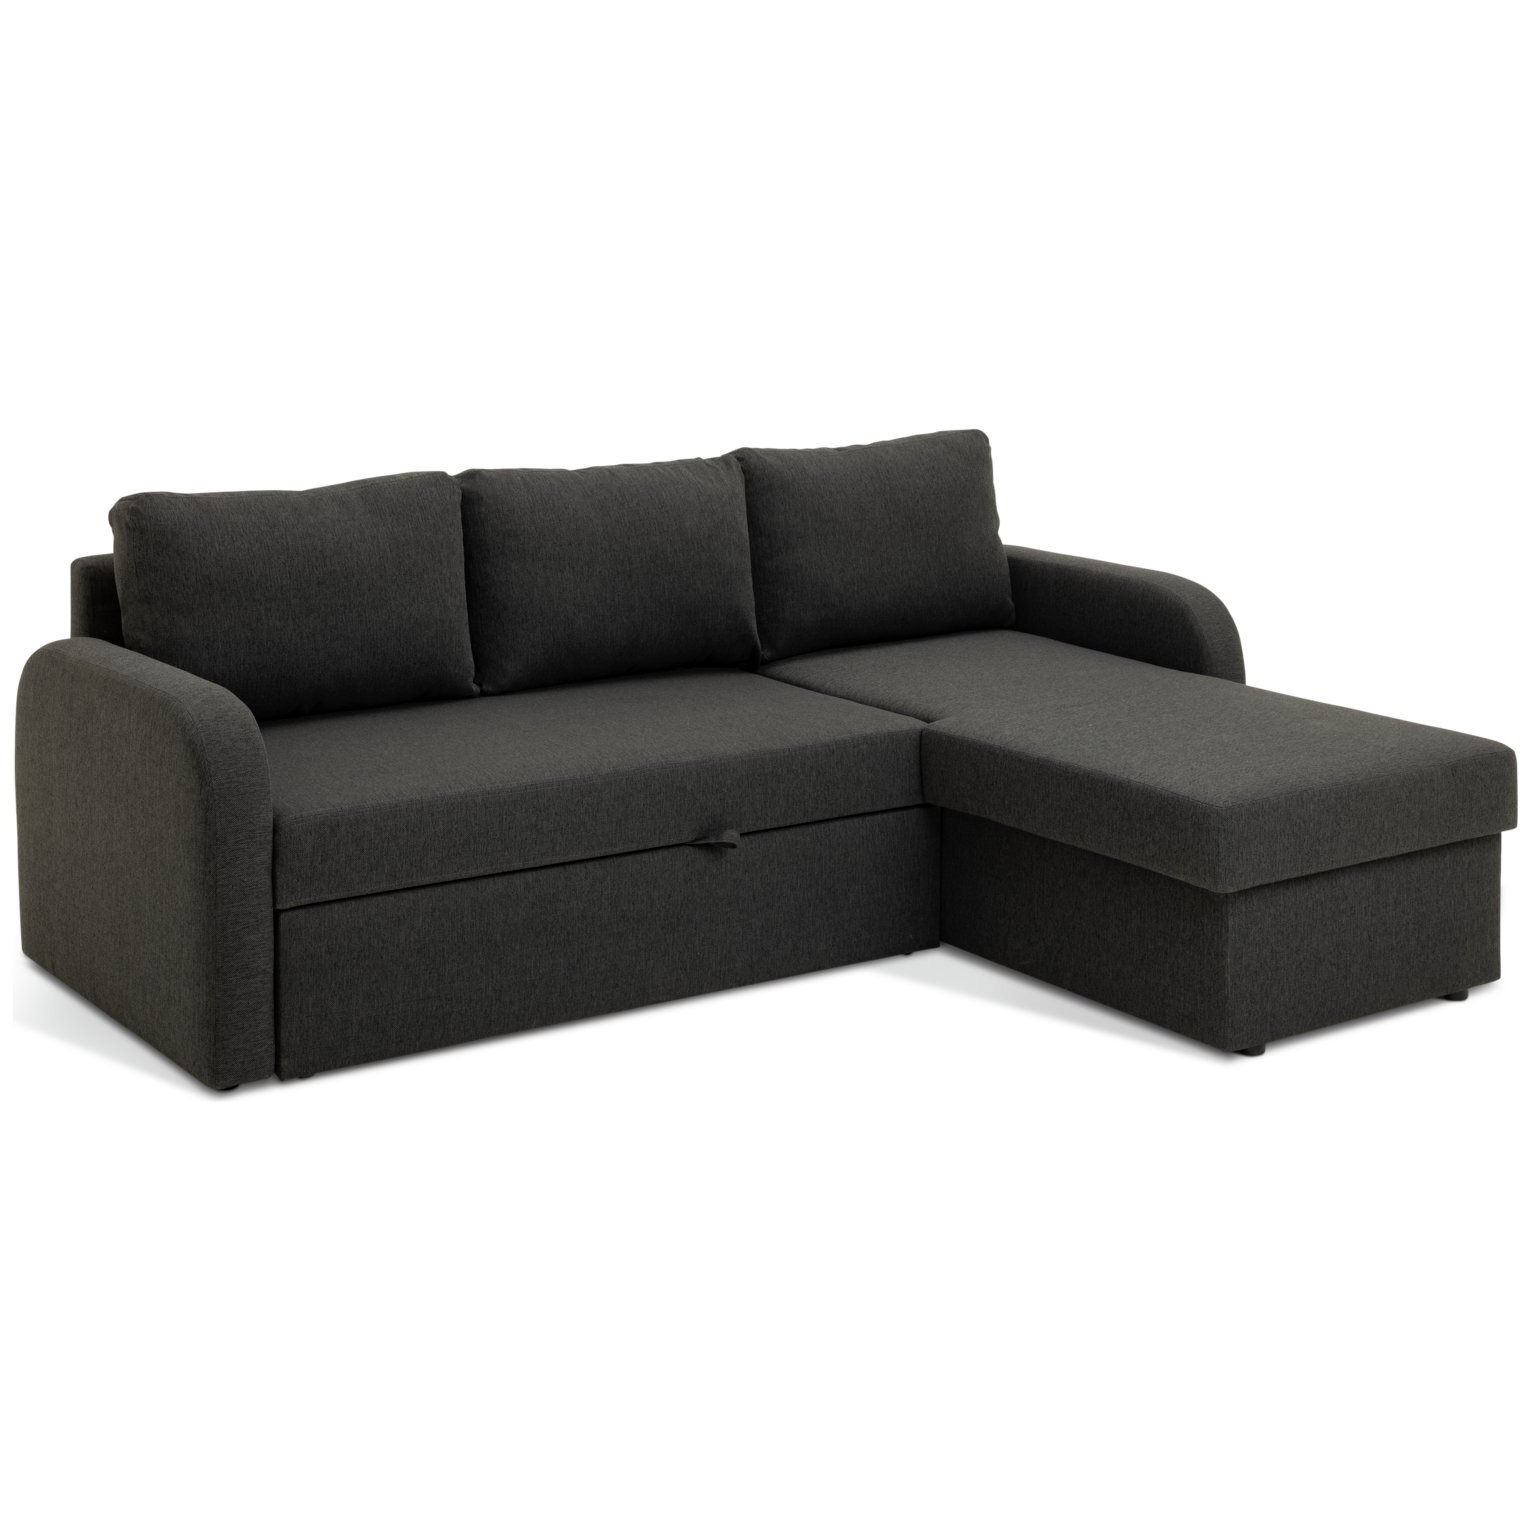 Habitat Carter Right Hand Corner Chaise Sofa Bed - Charcoal - image 1